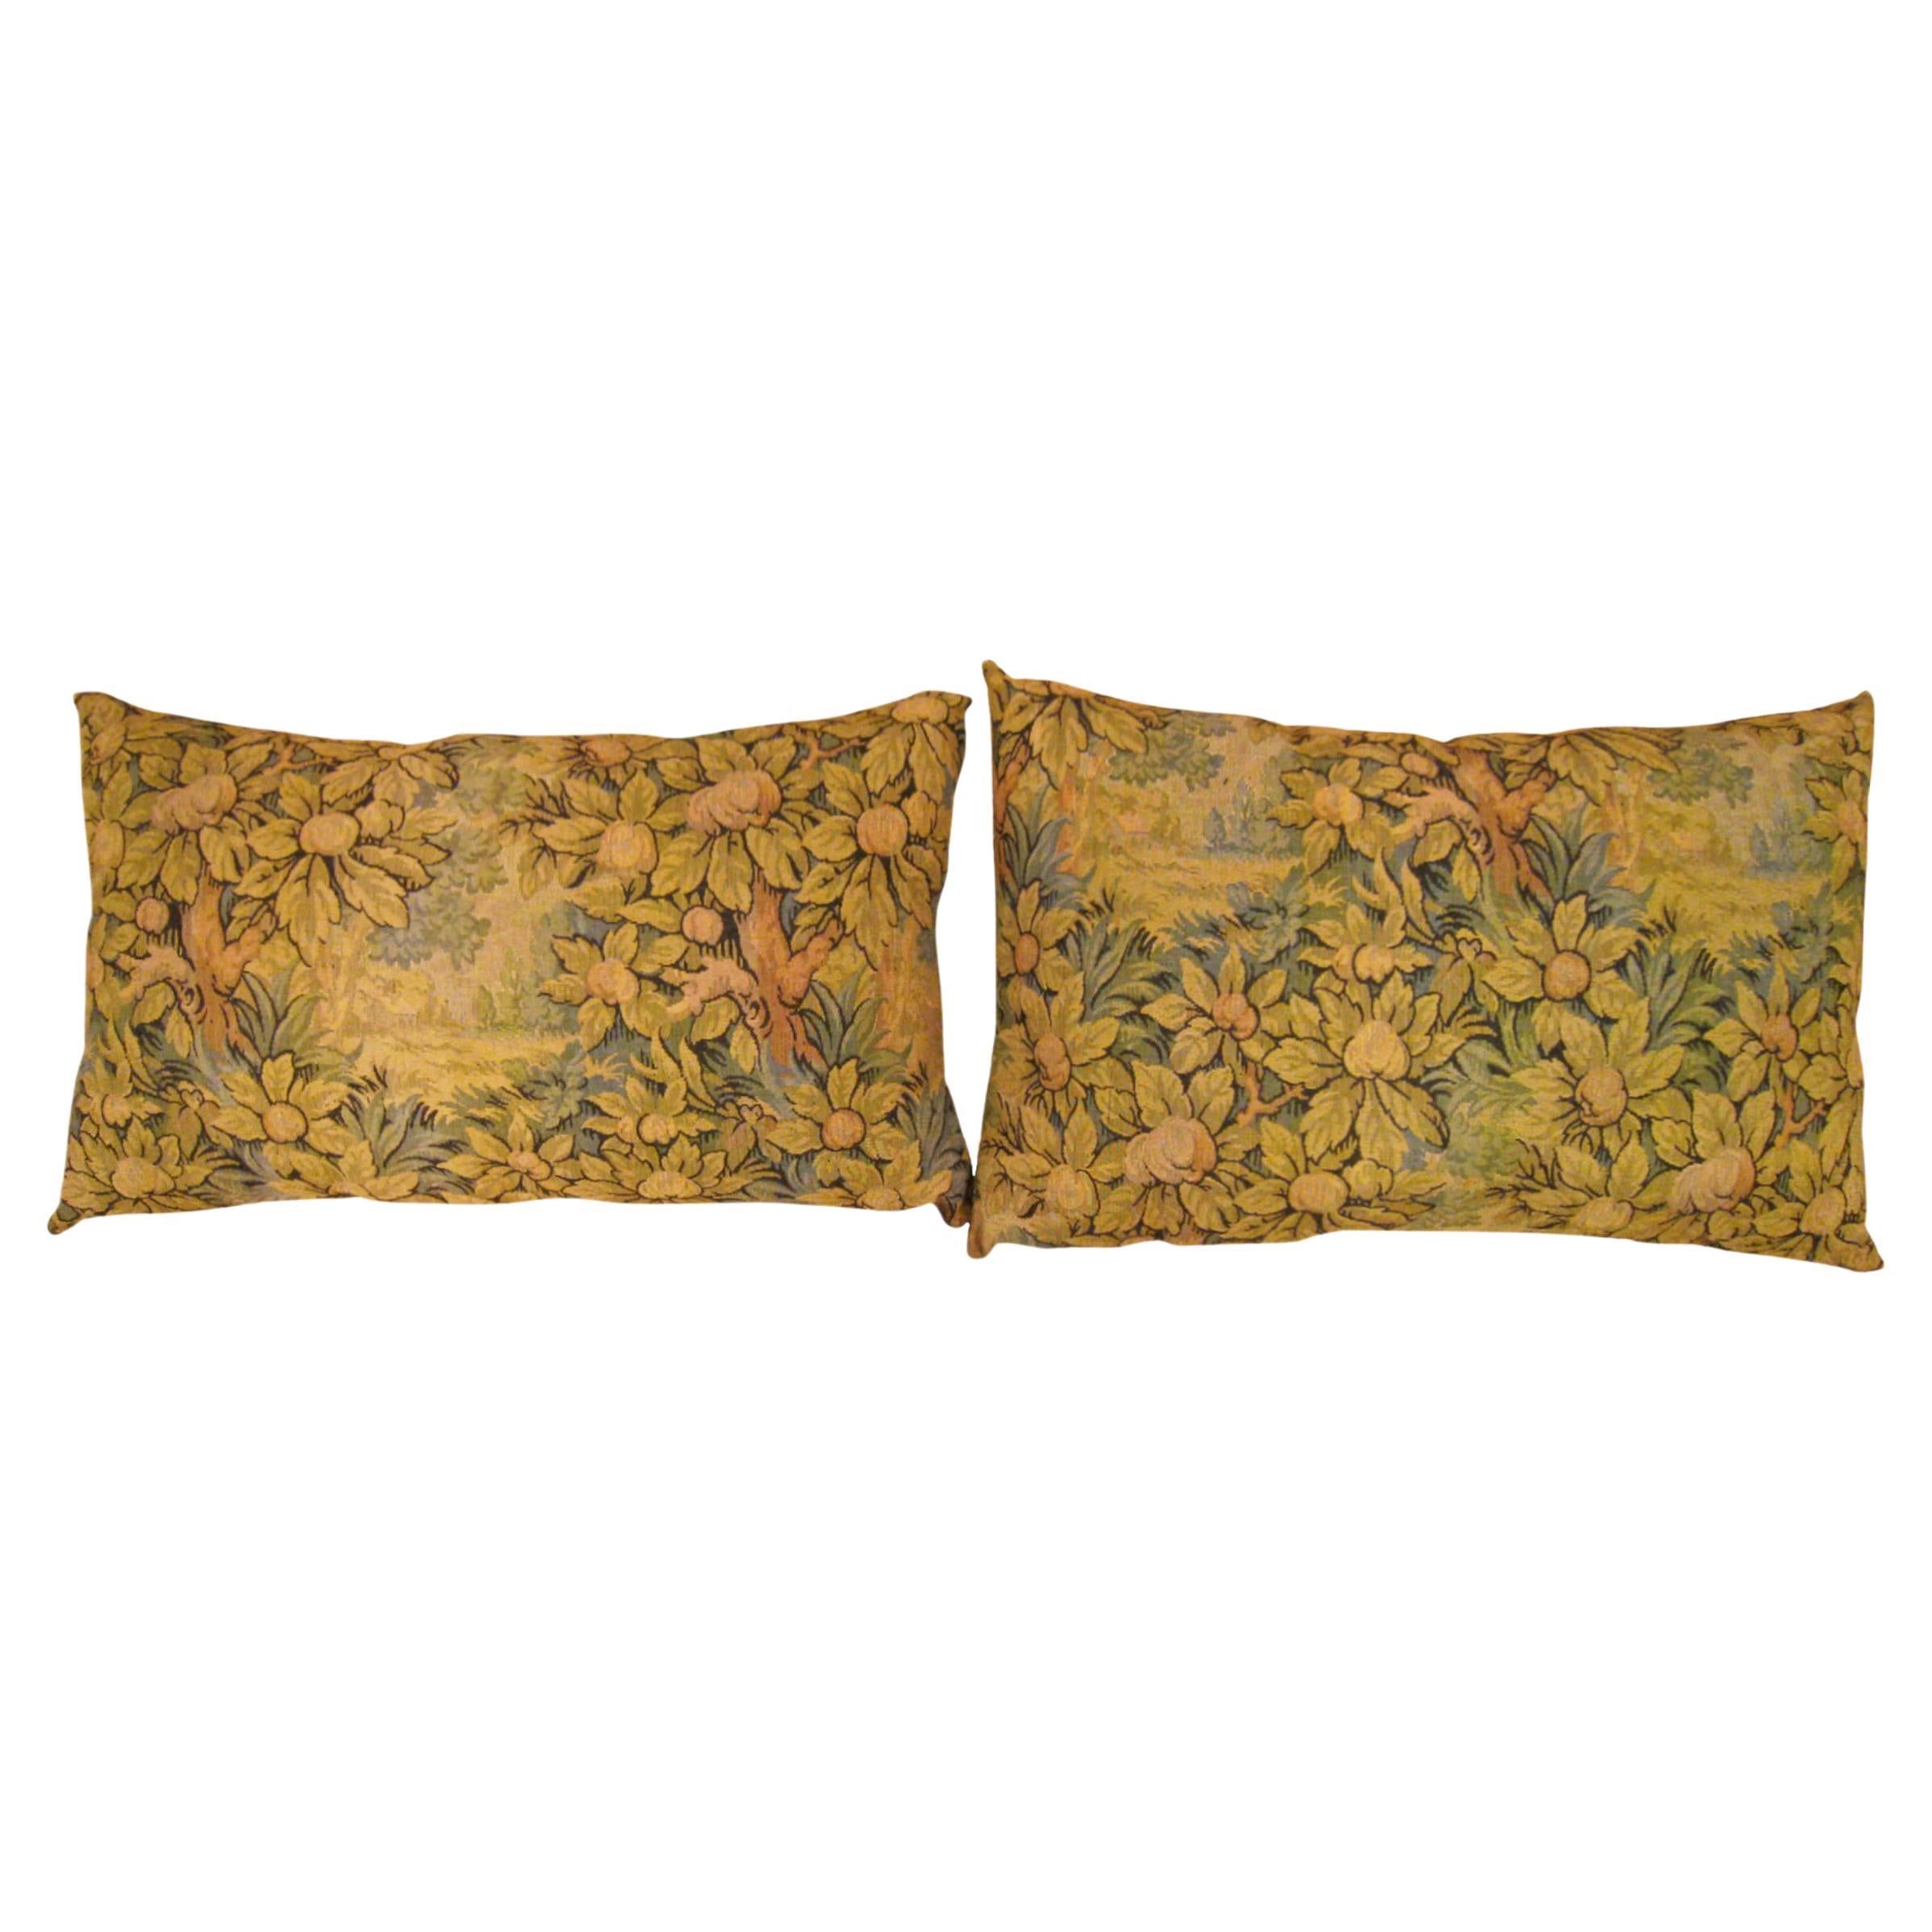 Pair of Decorative Antique Jacquard Tapestry Pillows with Trees Allover